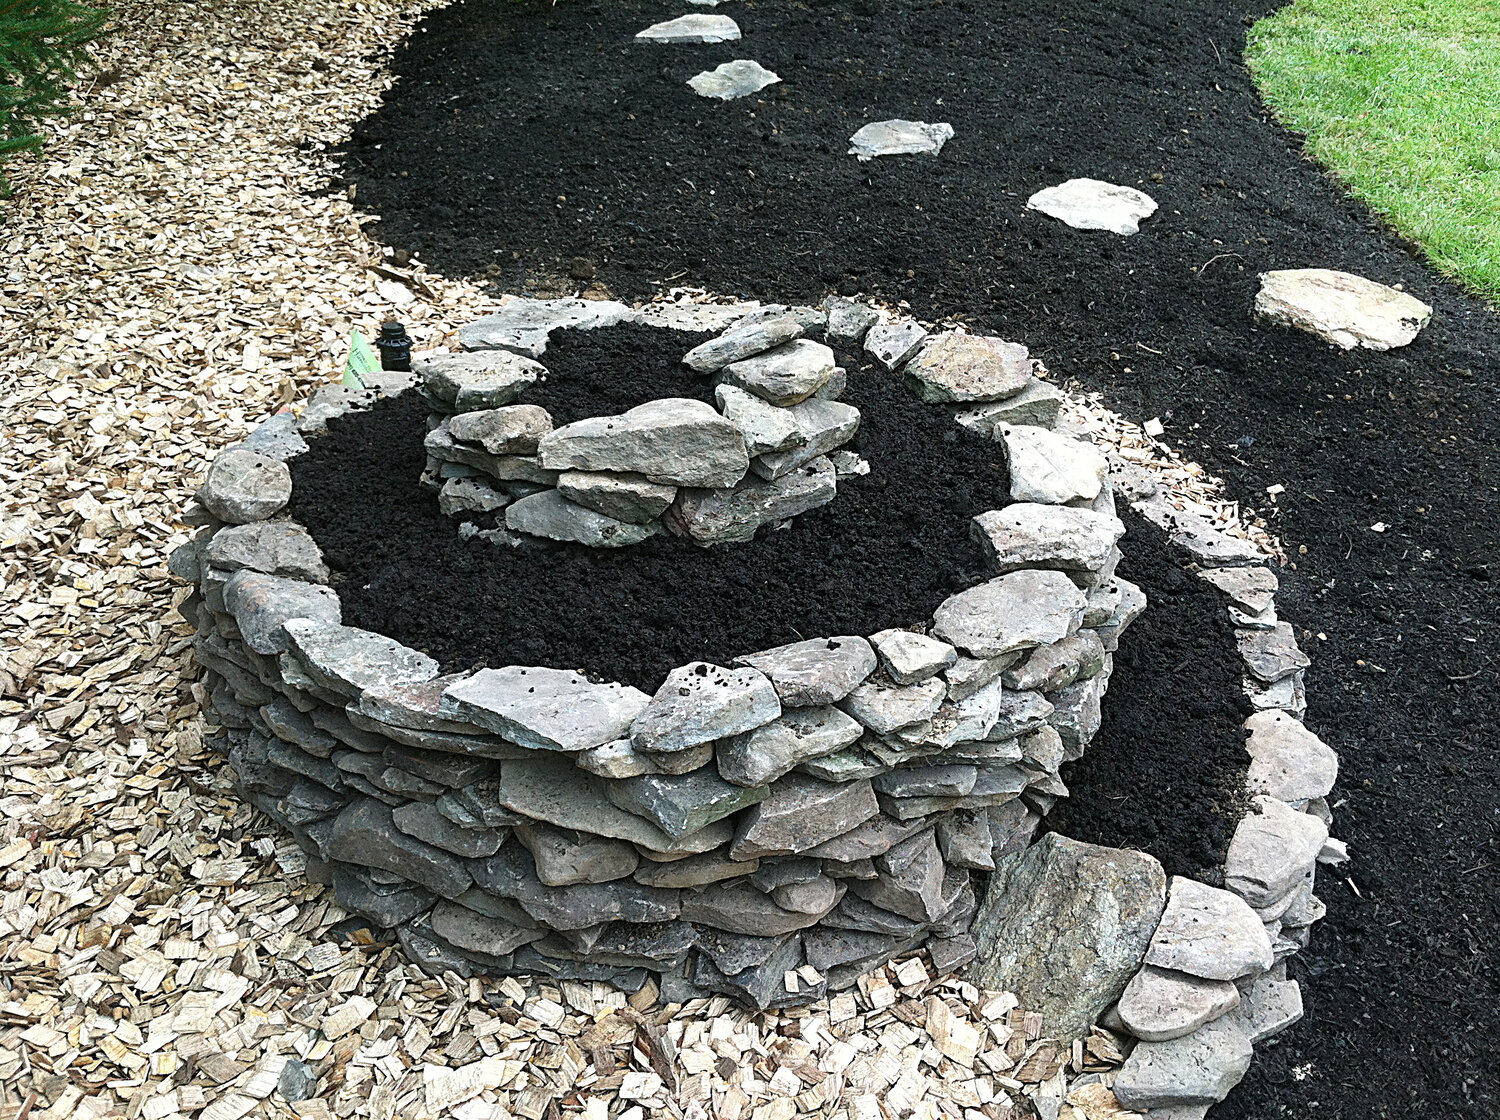 Small spiral anchors the larger garden bed or border